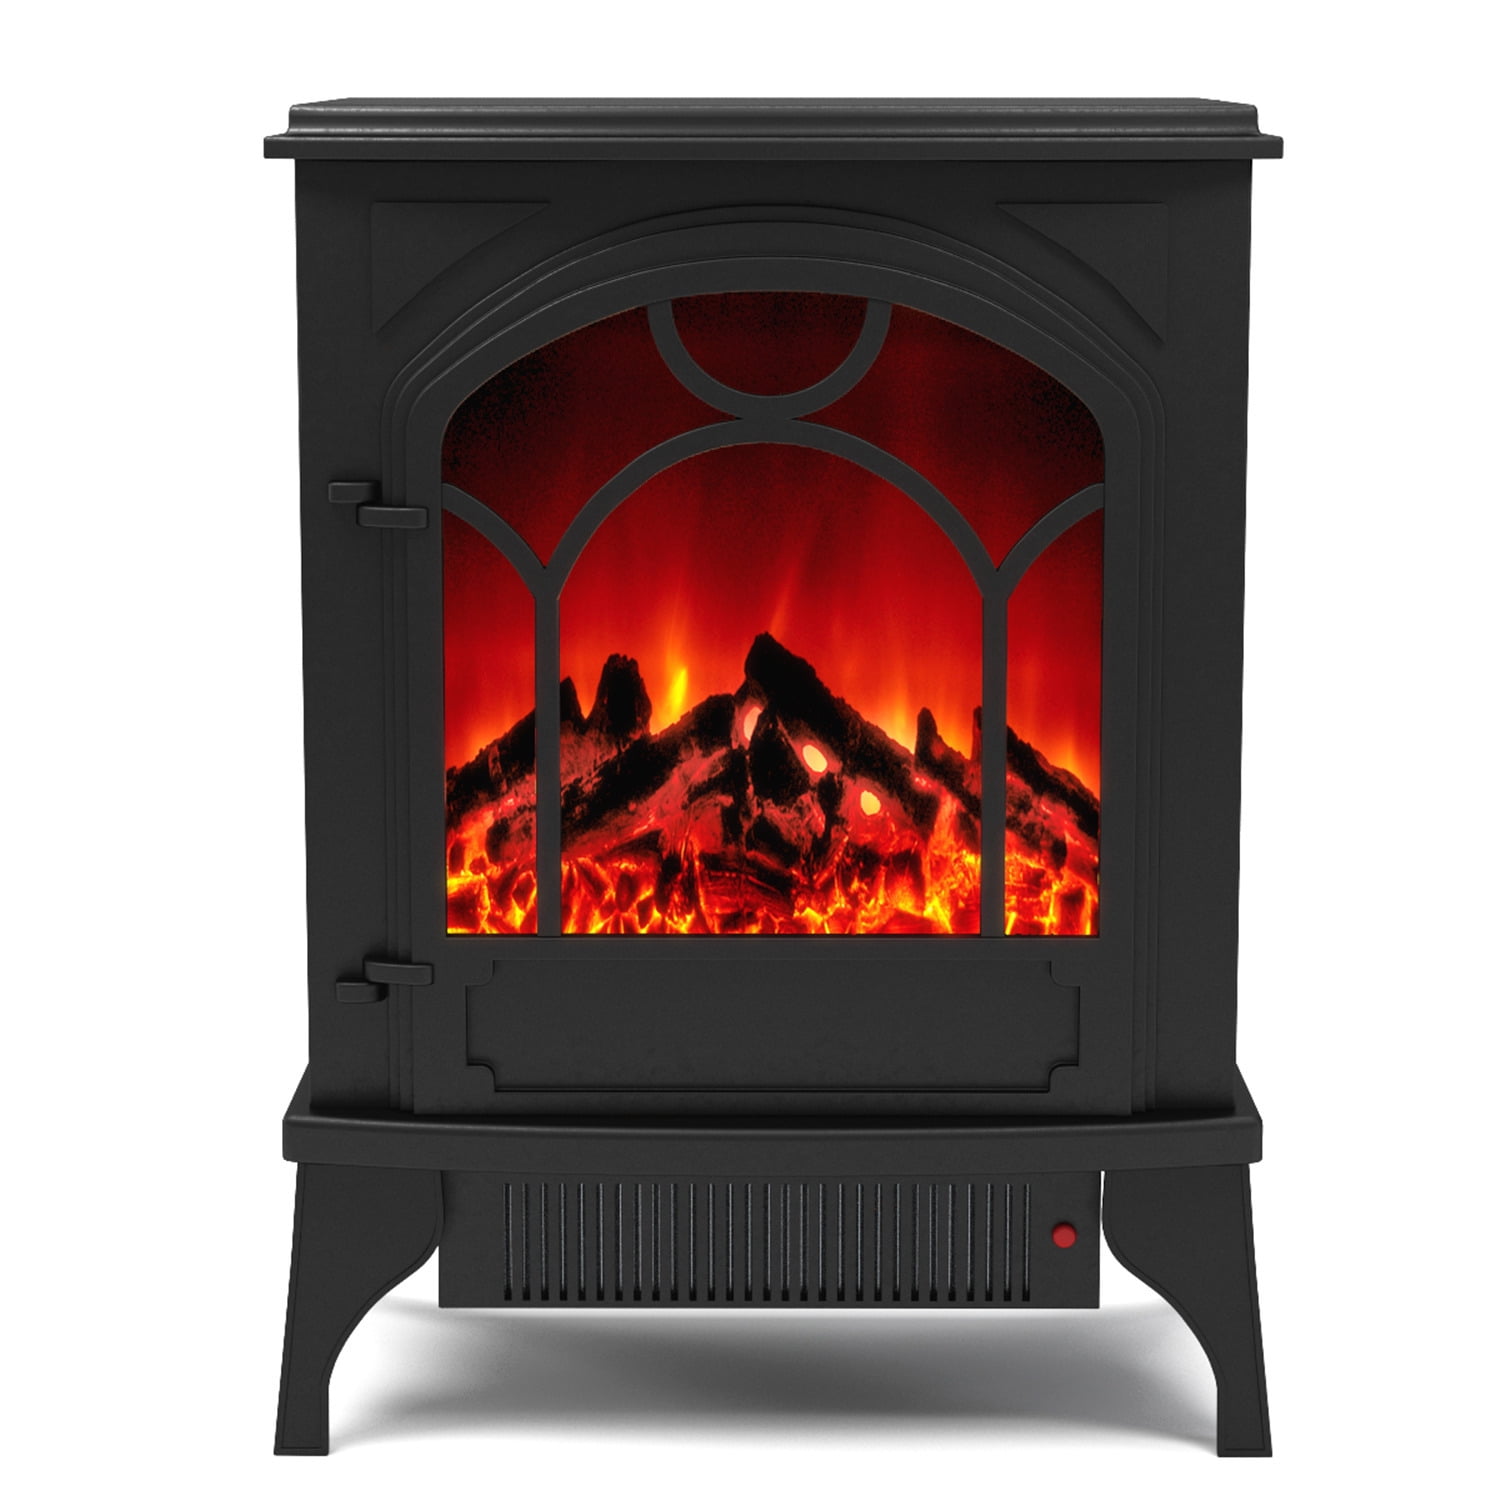 Regal Flame Aries Electric Fireplace Free Standing Portable Space Heater Stove Better than Wood Fireplaces, Gas Logs, Wall Mount